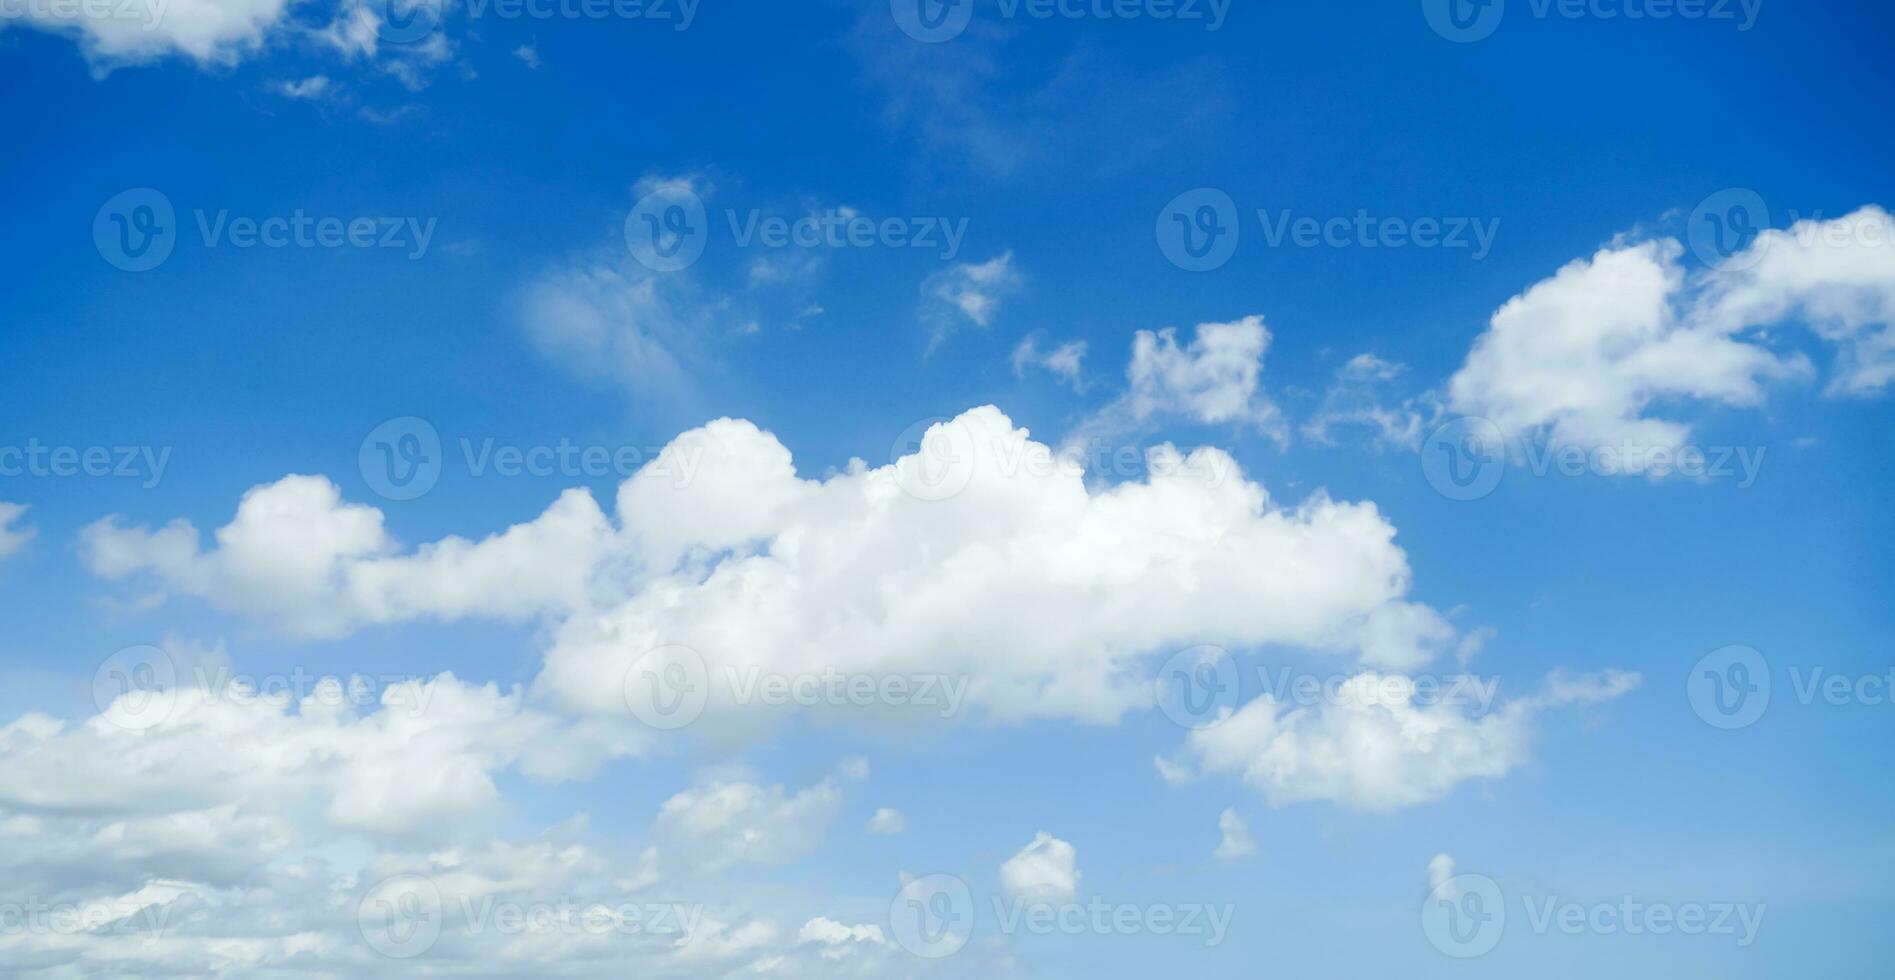 Cloudscape, Blue sky and white clouds, clear blue sky background, clouds with background. photo